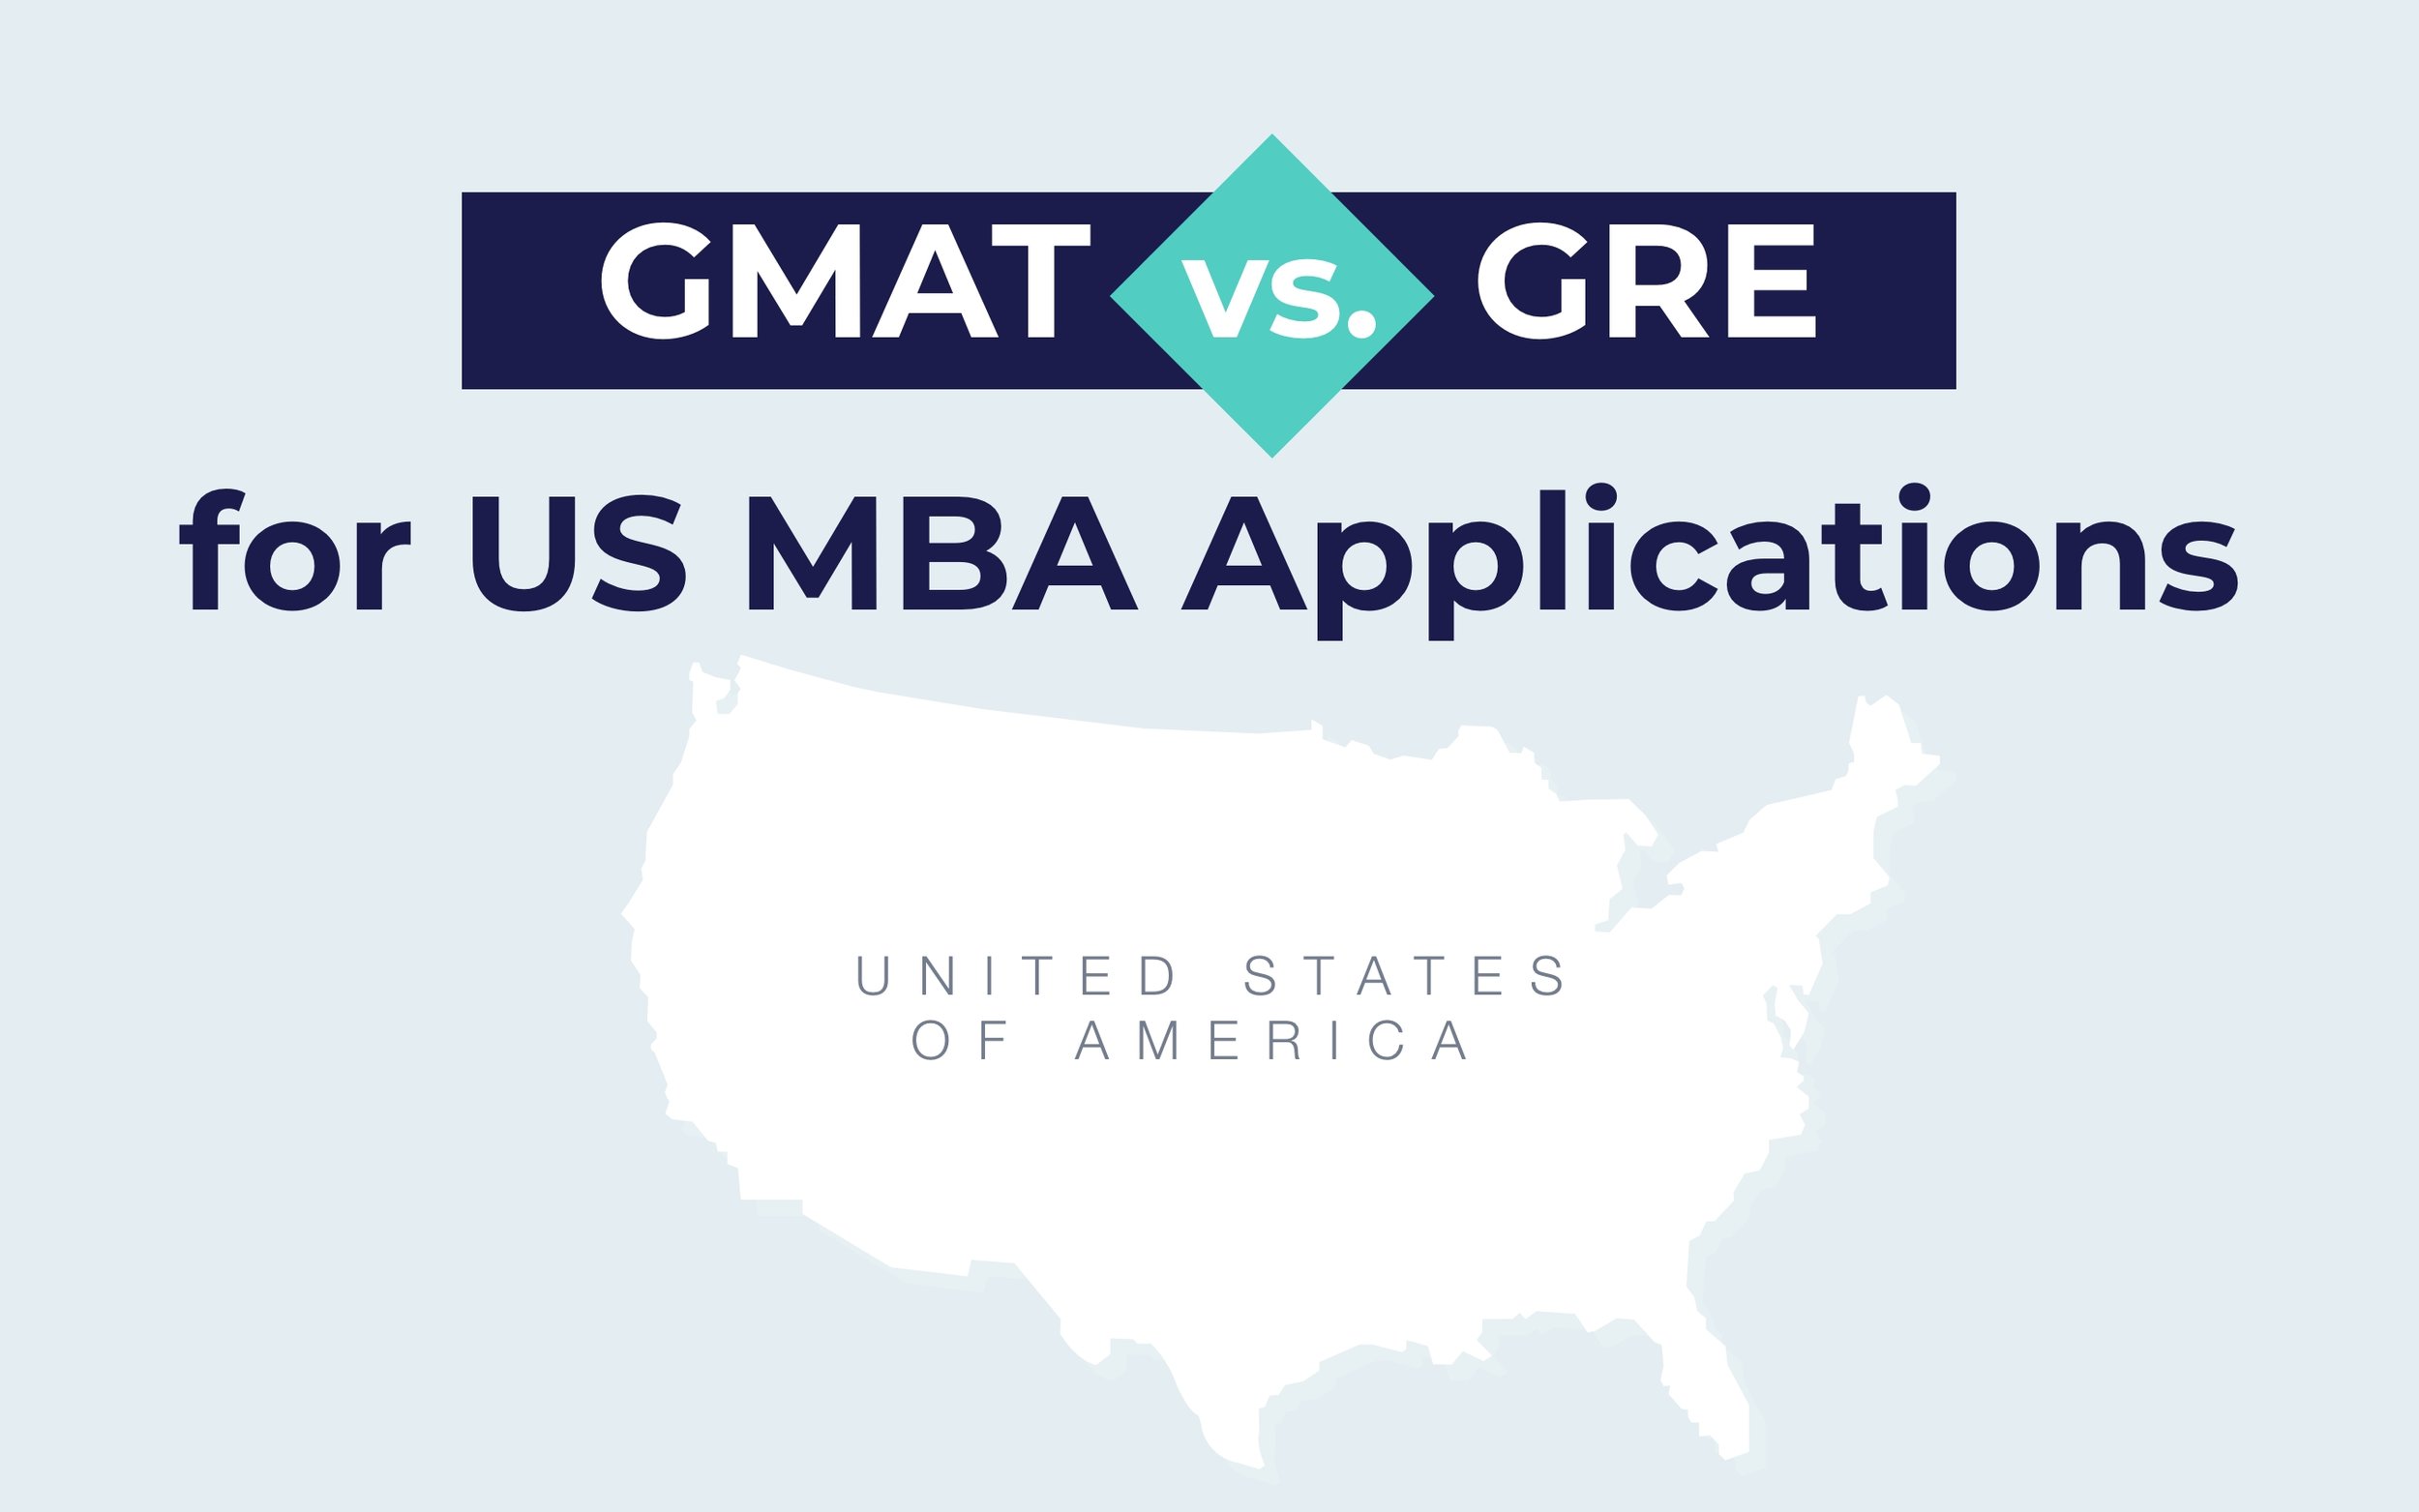 GMAT 700 in 2 months and Foster admit